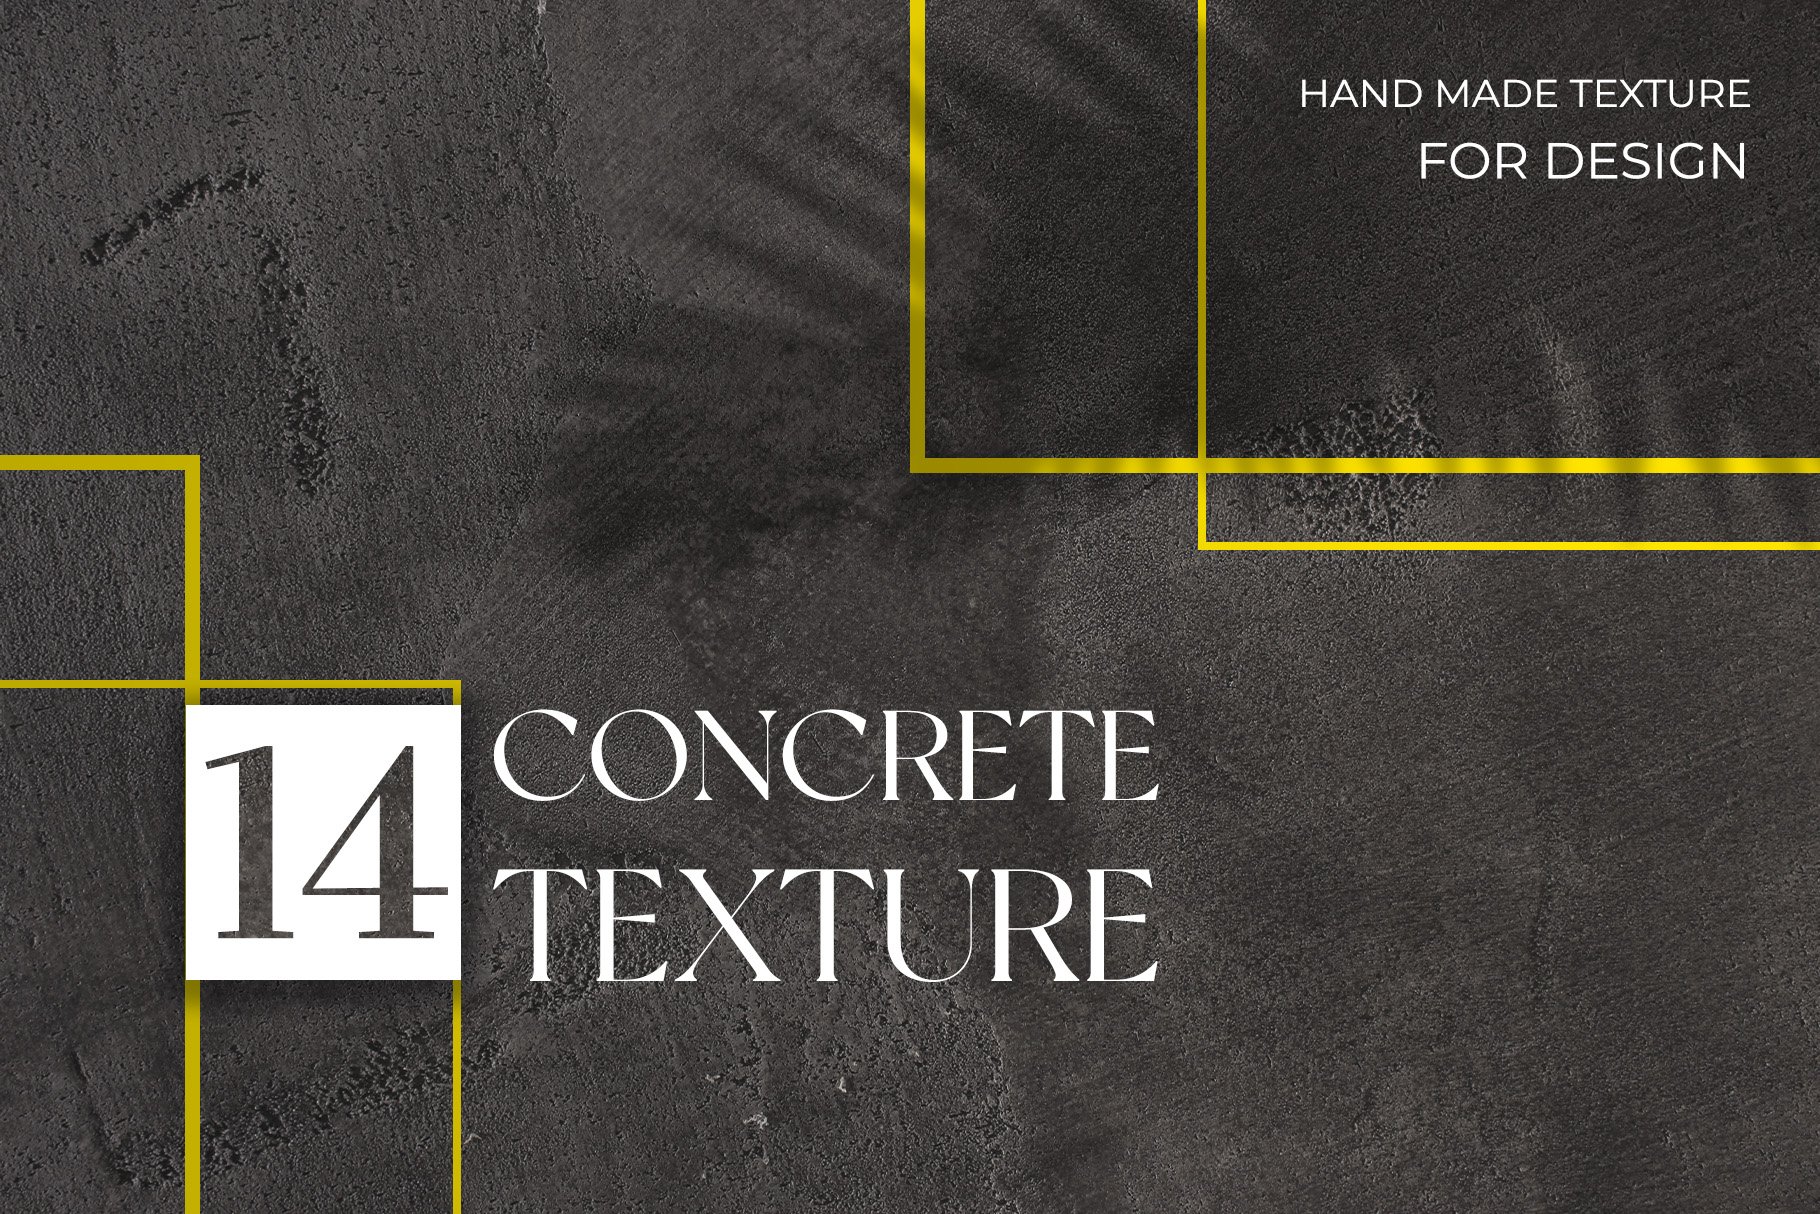 14 concrete texture. Grey background cover image.